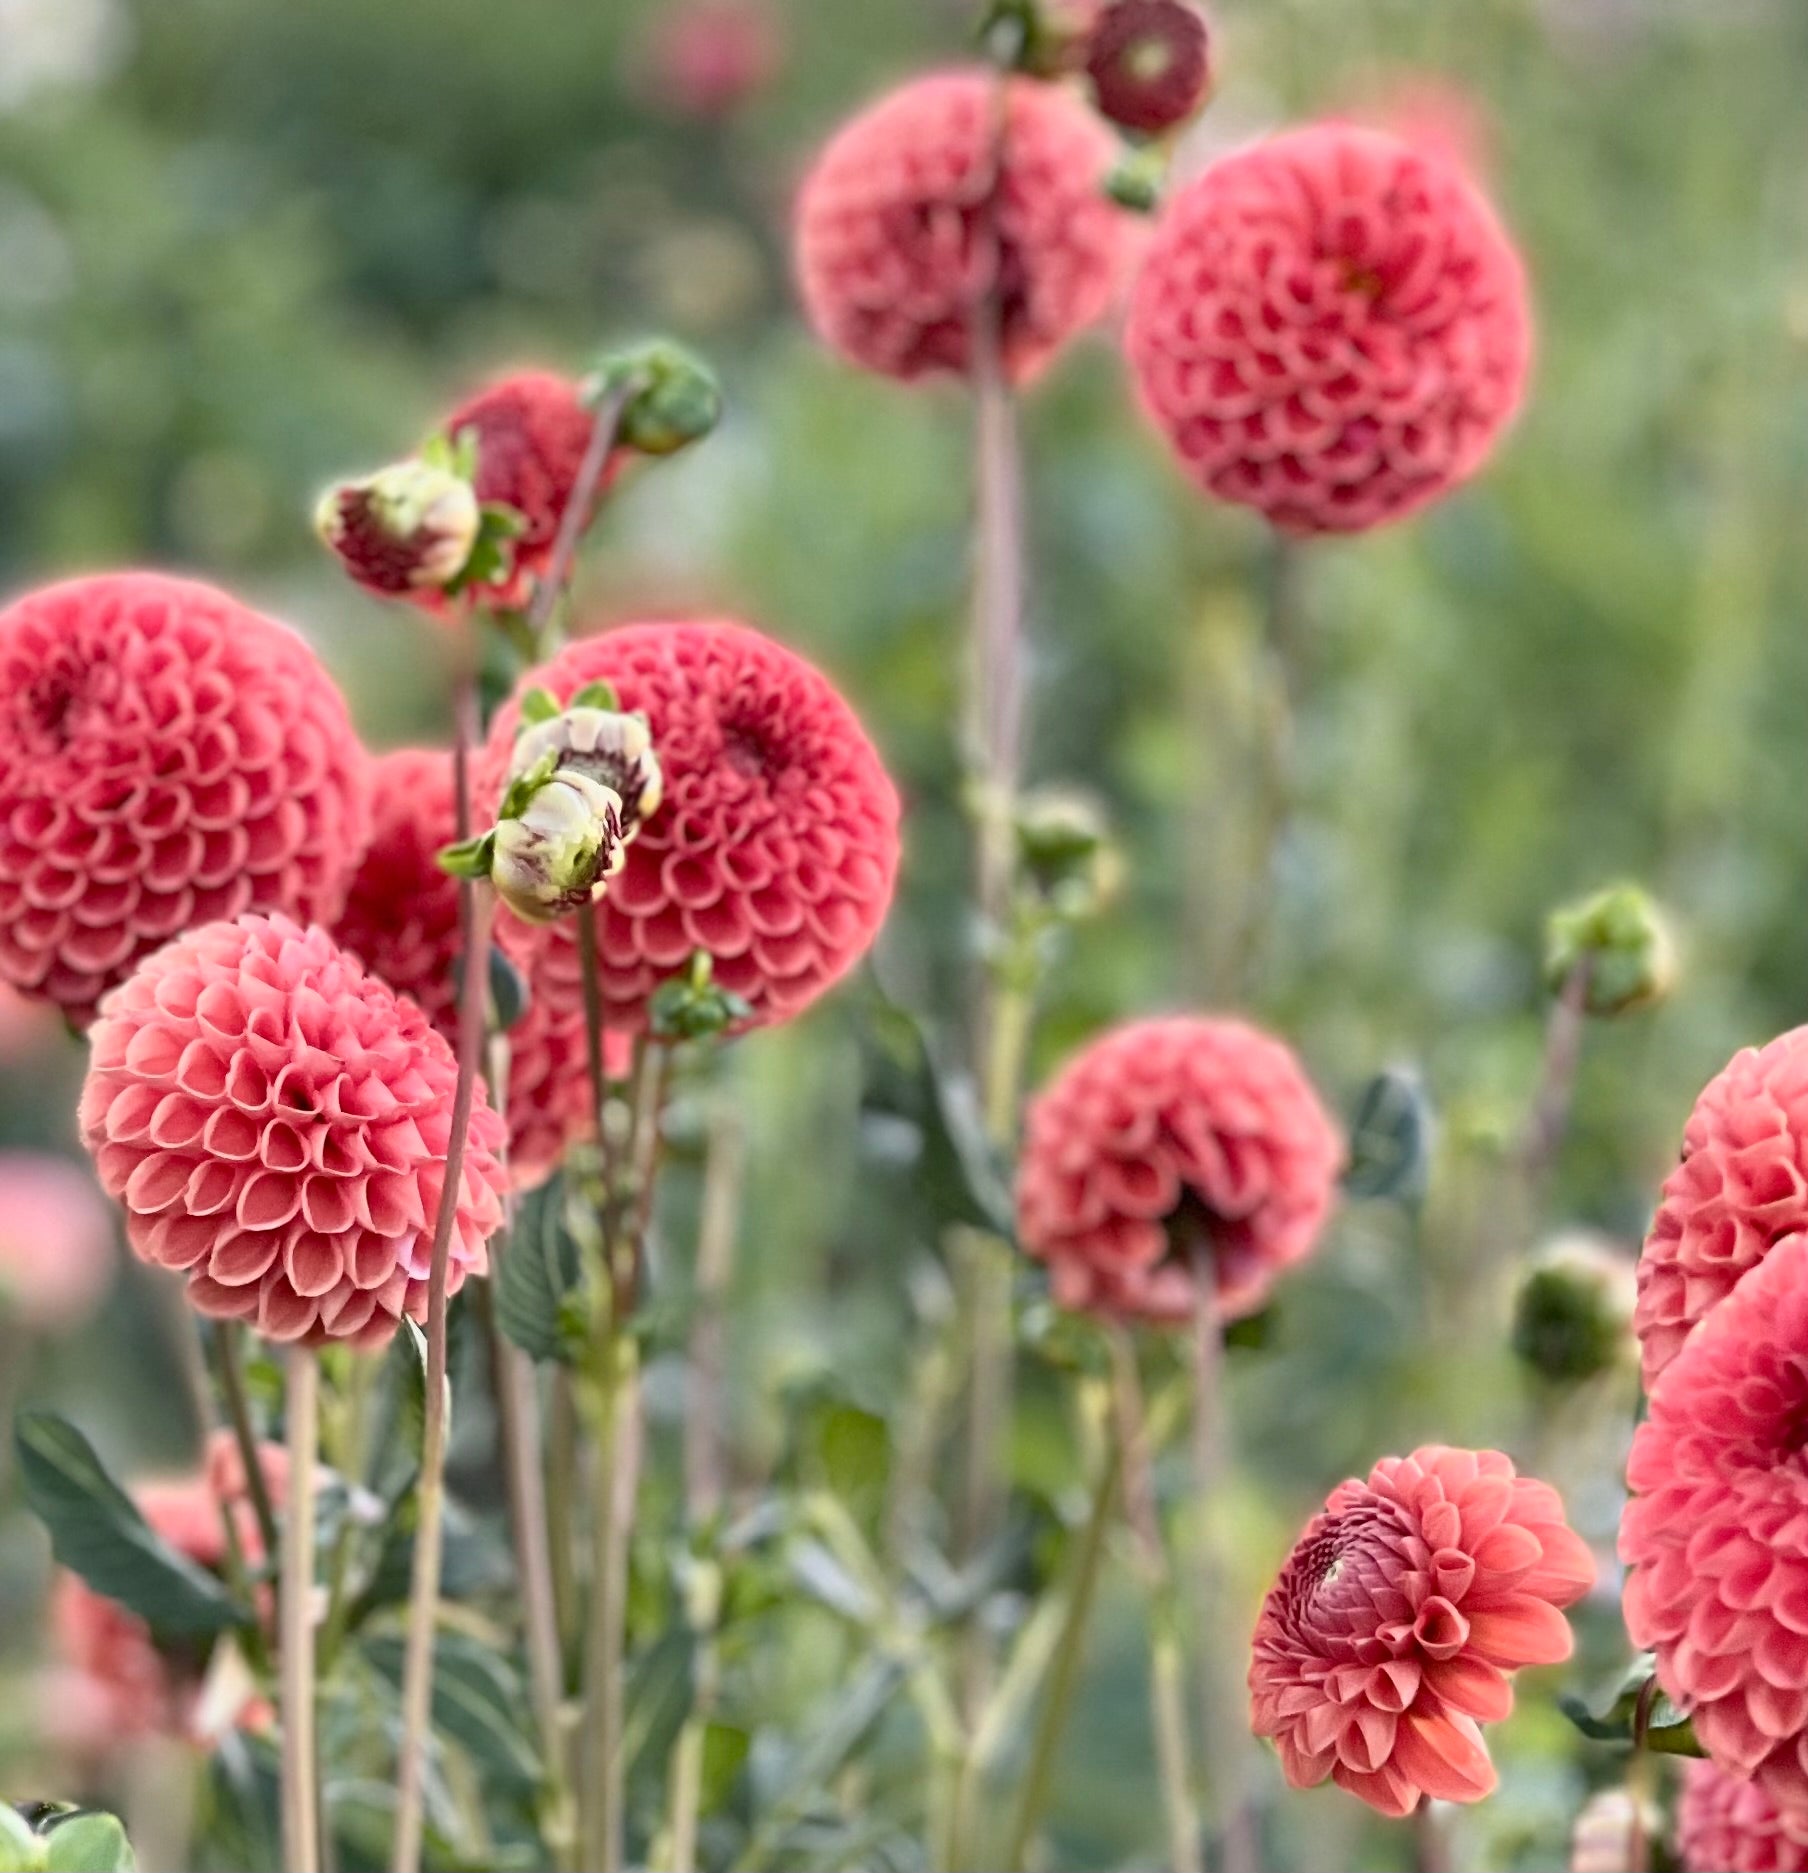 Planting and Caring for Dahlias to get the most Flowers for Cutting